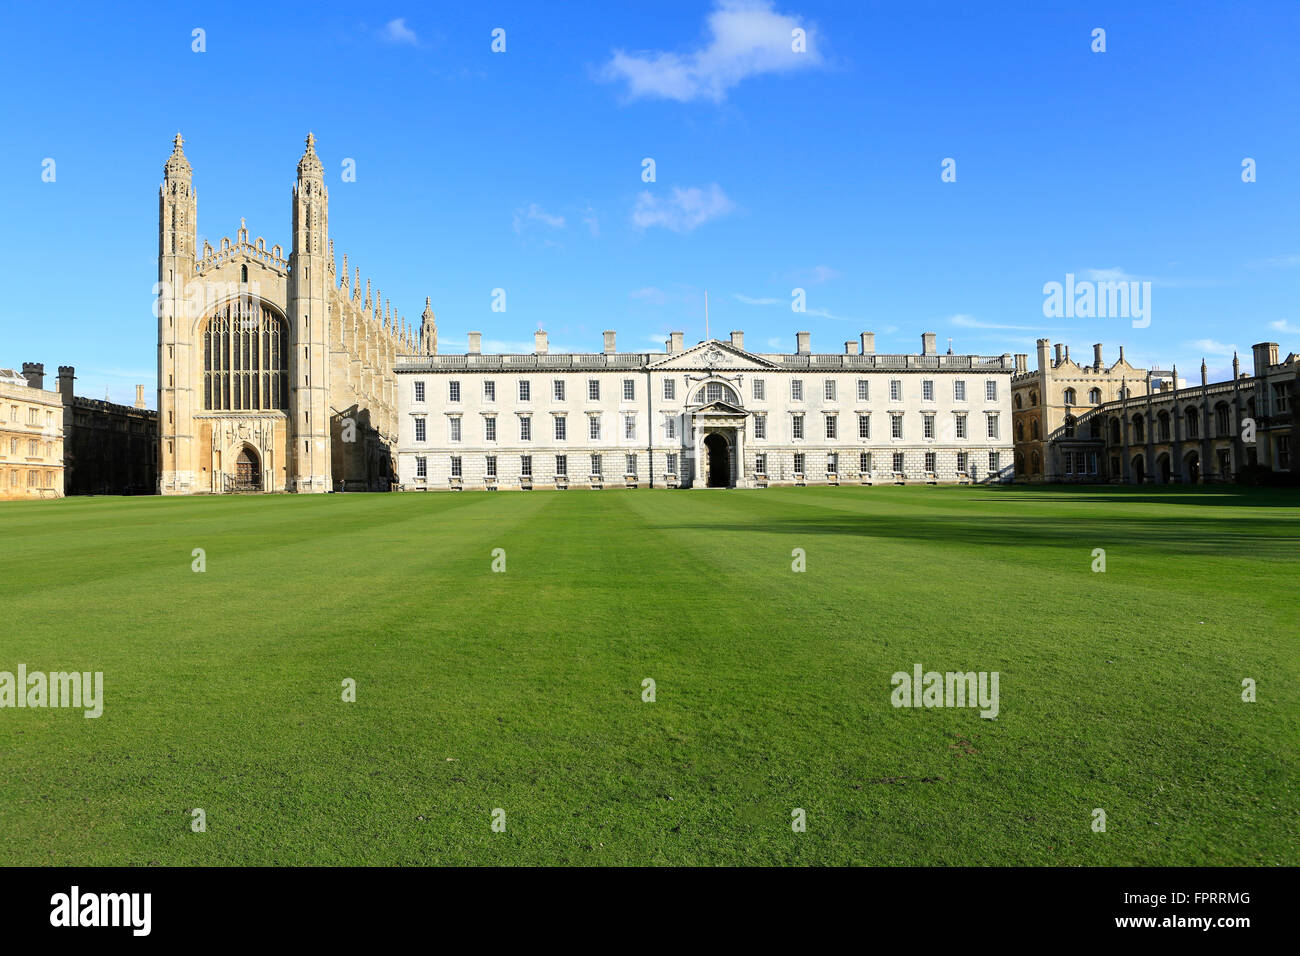 United Kingdom, Cambridge, University of Cambridge, Kings College showing the famous Gothic chapel and James Gibbs building, from the the Cam River Stock Photo